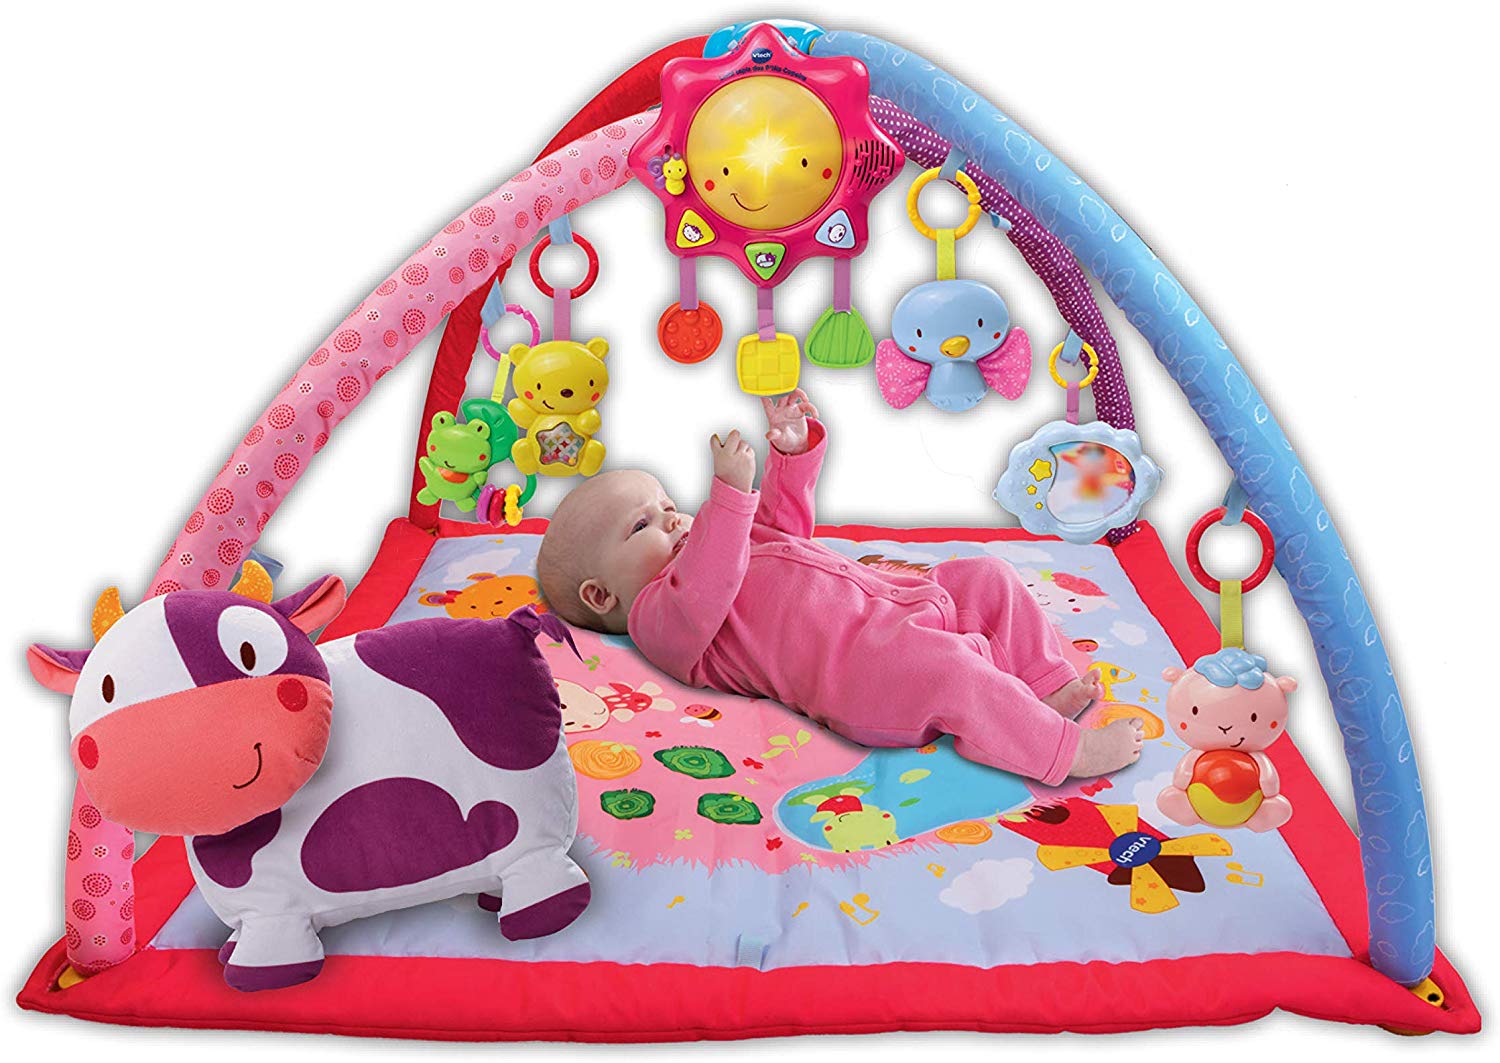 Blanket and Gym Singing 2 in 1 Pink